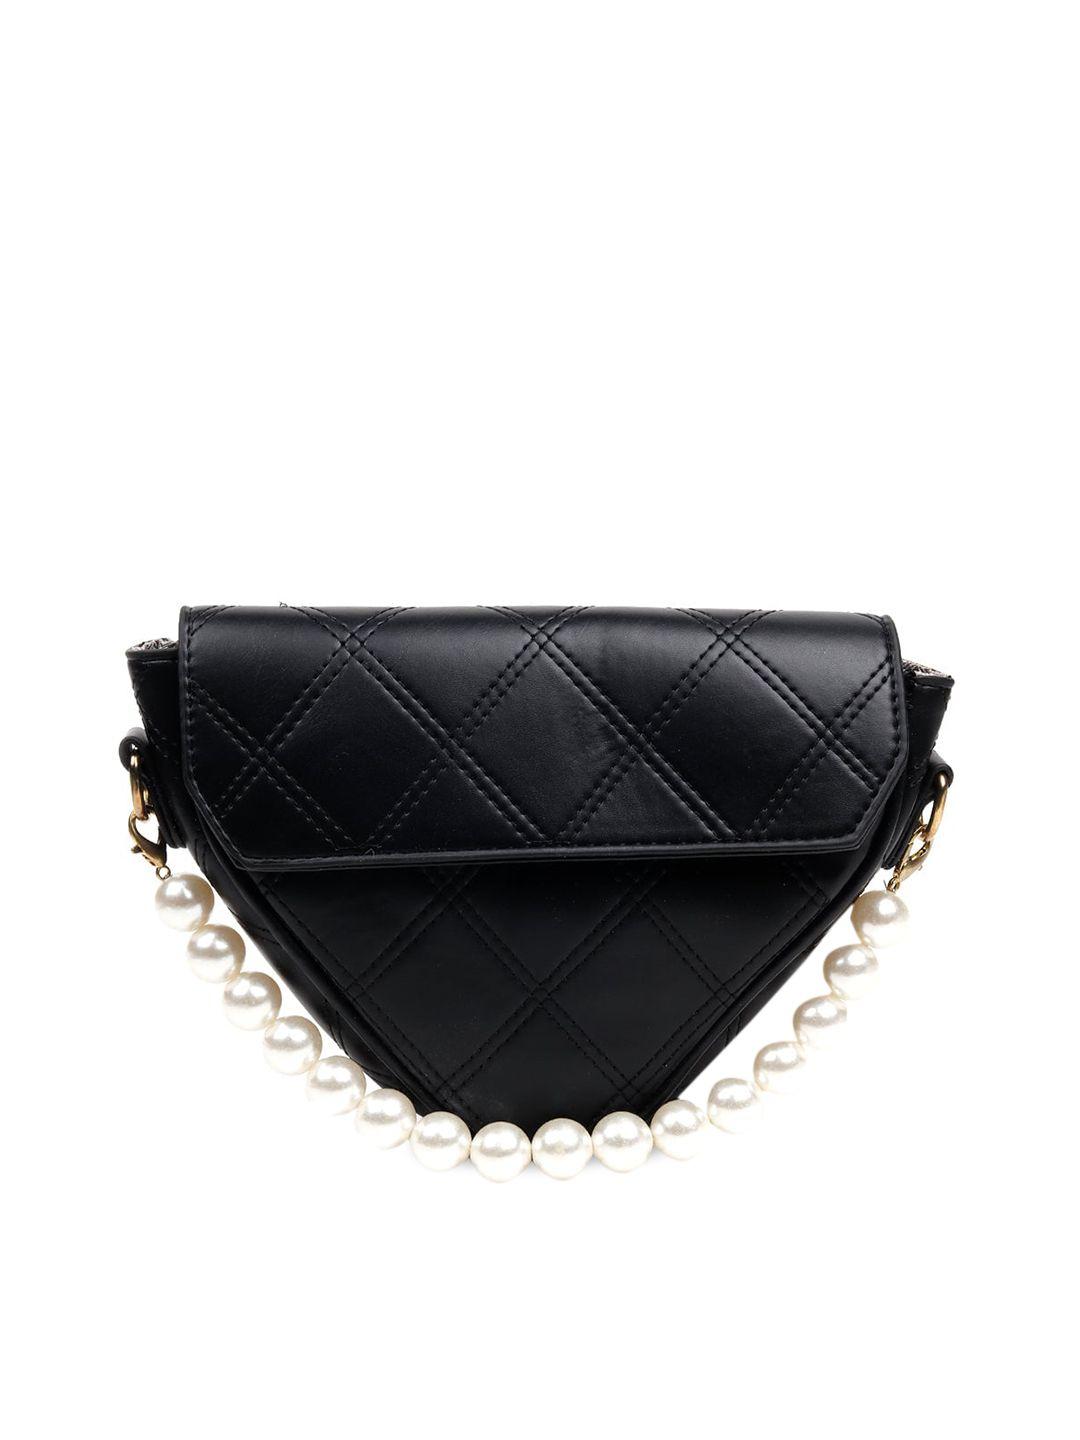 odette black geometric textured half moon sling bag with quilted